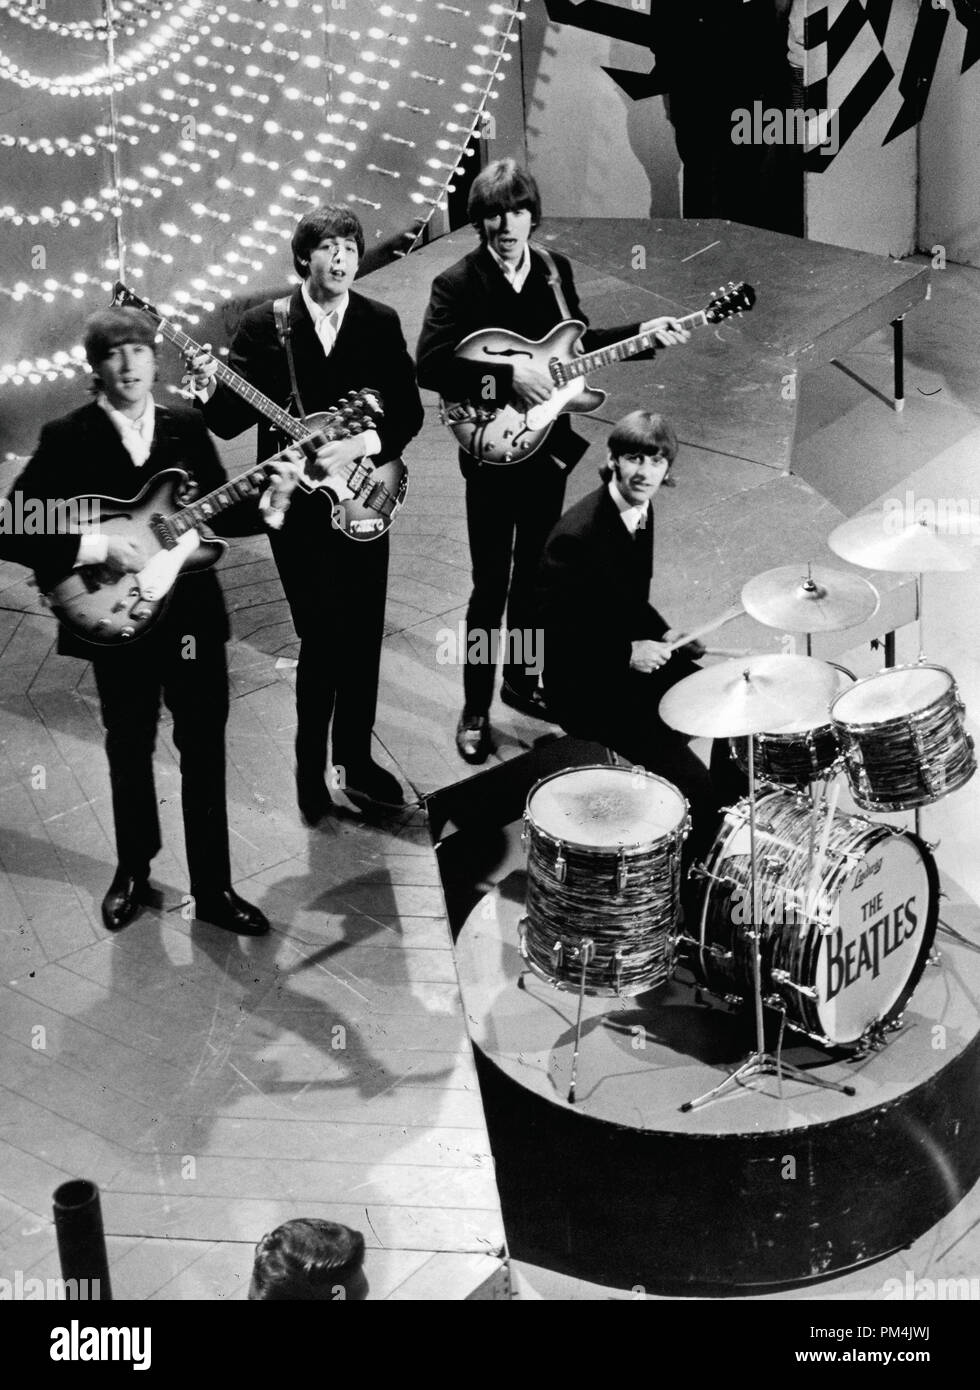 The Beatles, John Lennon, Paul McCartney, George Harrison and Ringo Starr,1966. File Reference #1013 068 THA © JRC /The Hollywood Archive - All Rights Reserved. Stock Photo